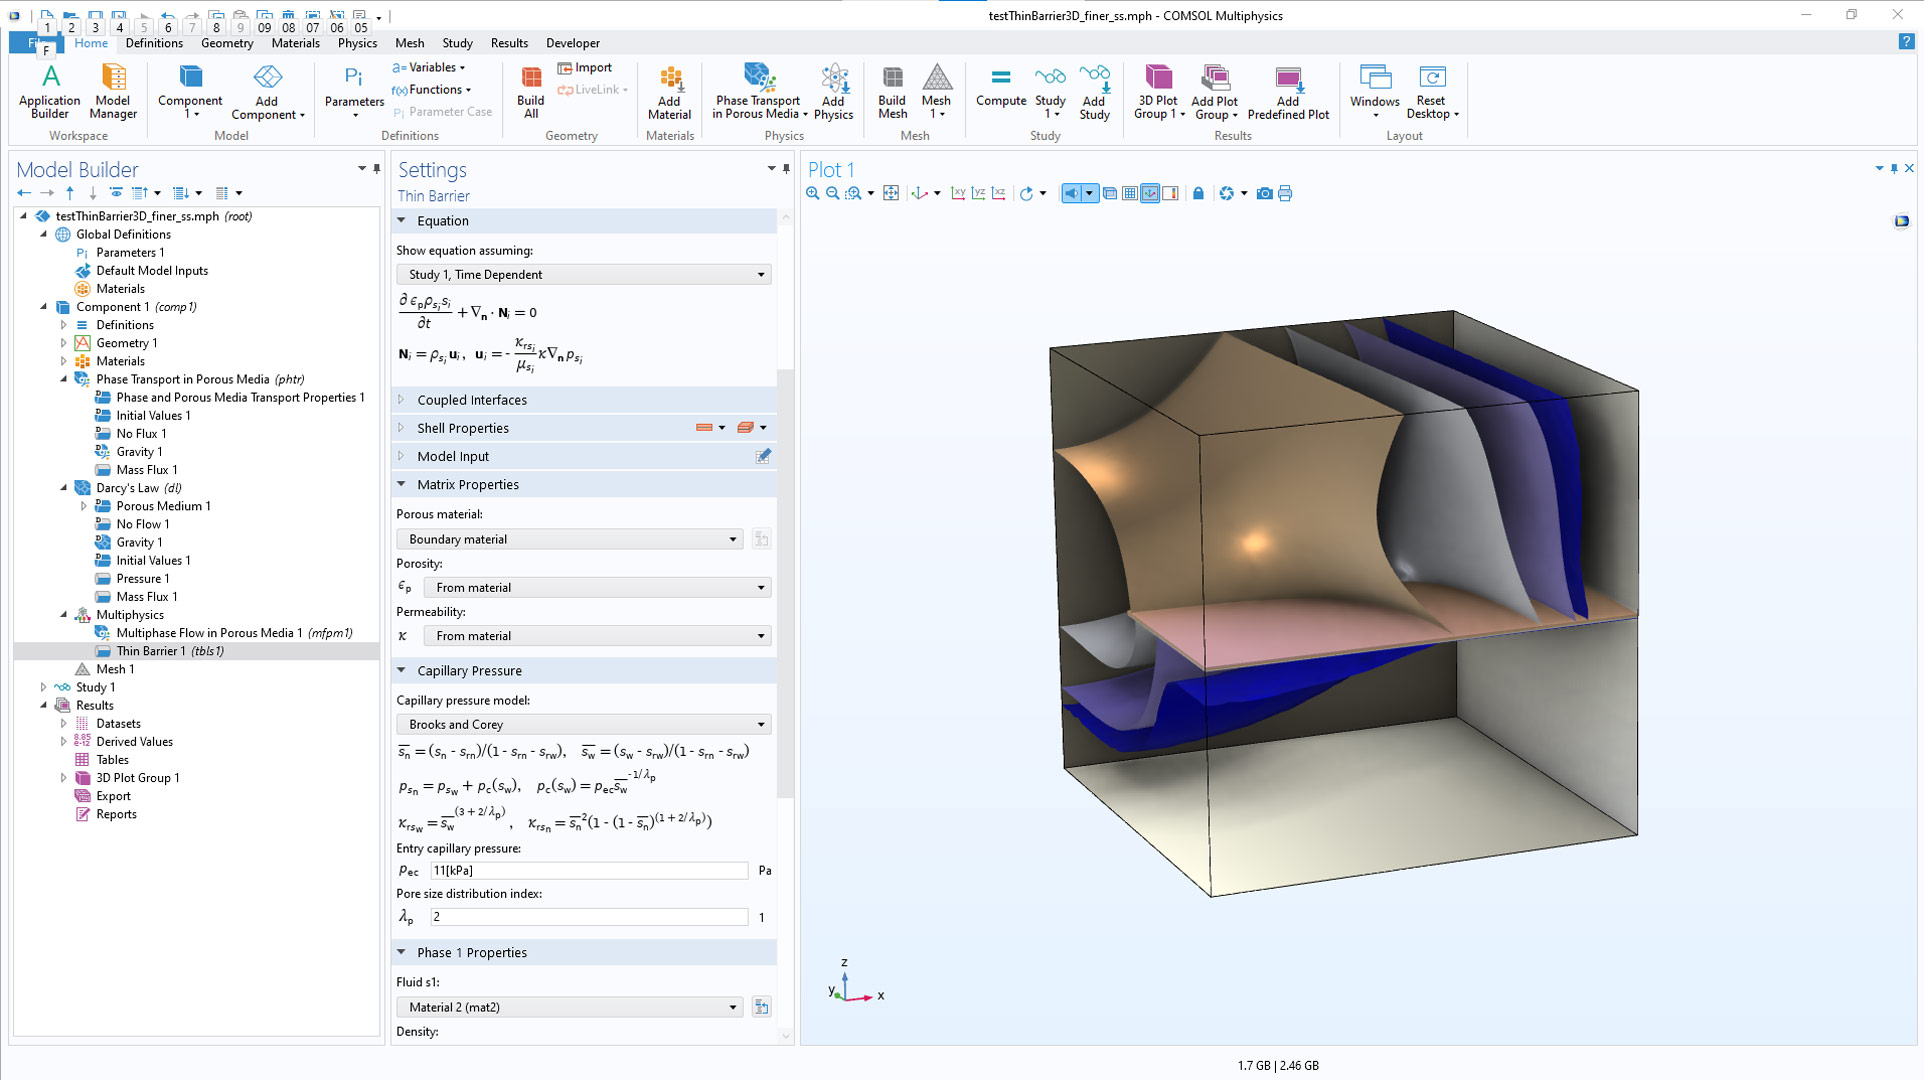 The COMSOL Multiphysics UI showing the Model Builder window with the Thin Barrier coupling selected, the corresponding Settings window, and the Graphics window showing the thin barrier in a porous medium.